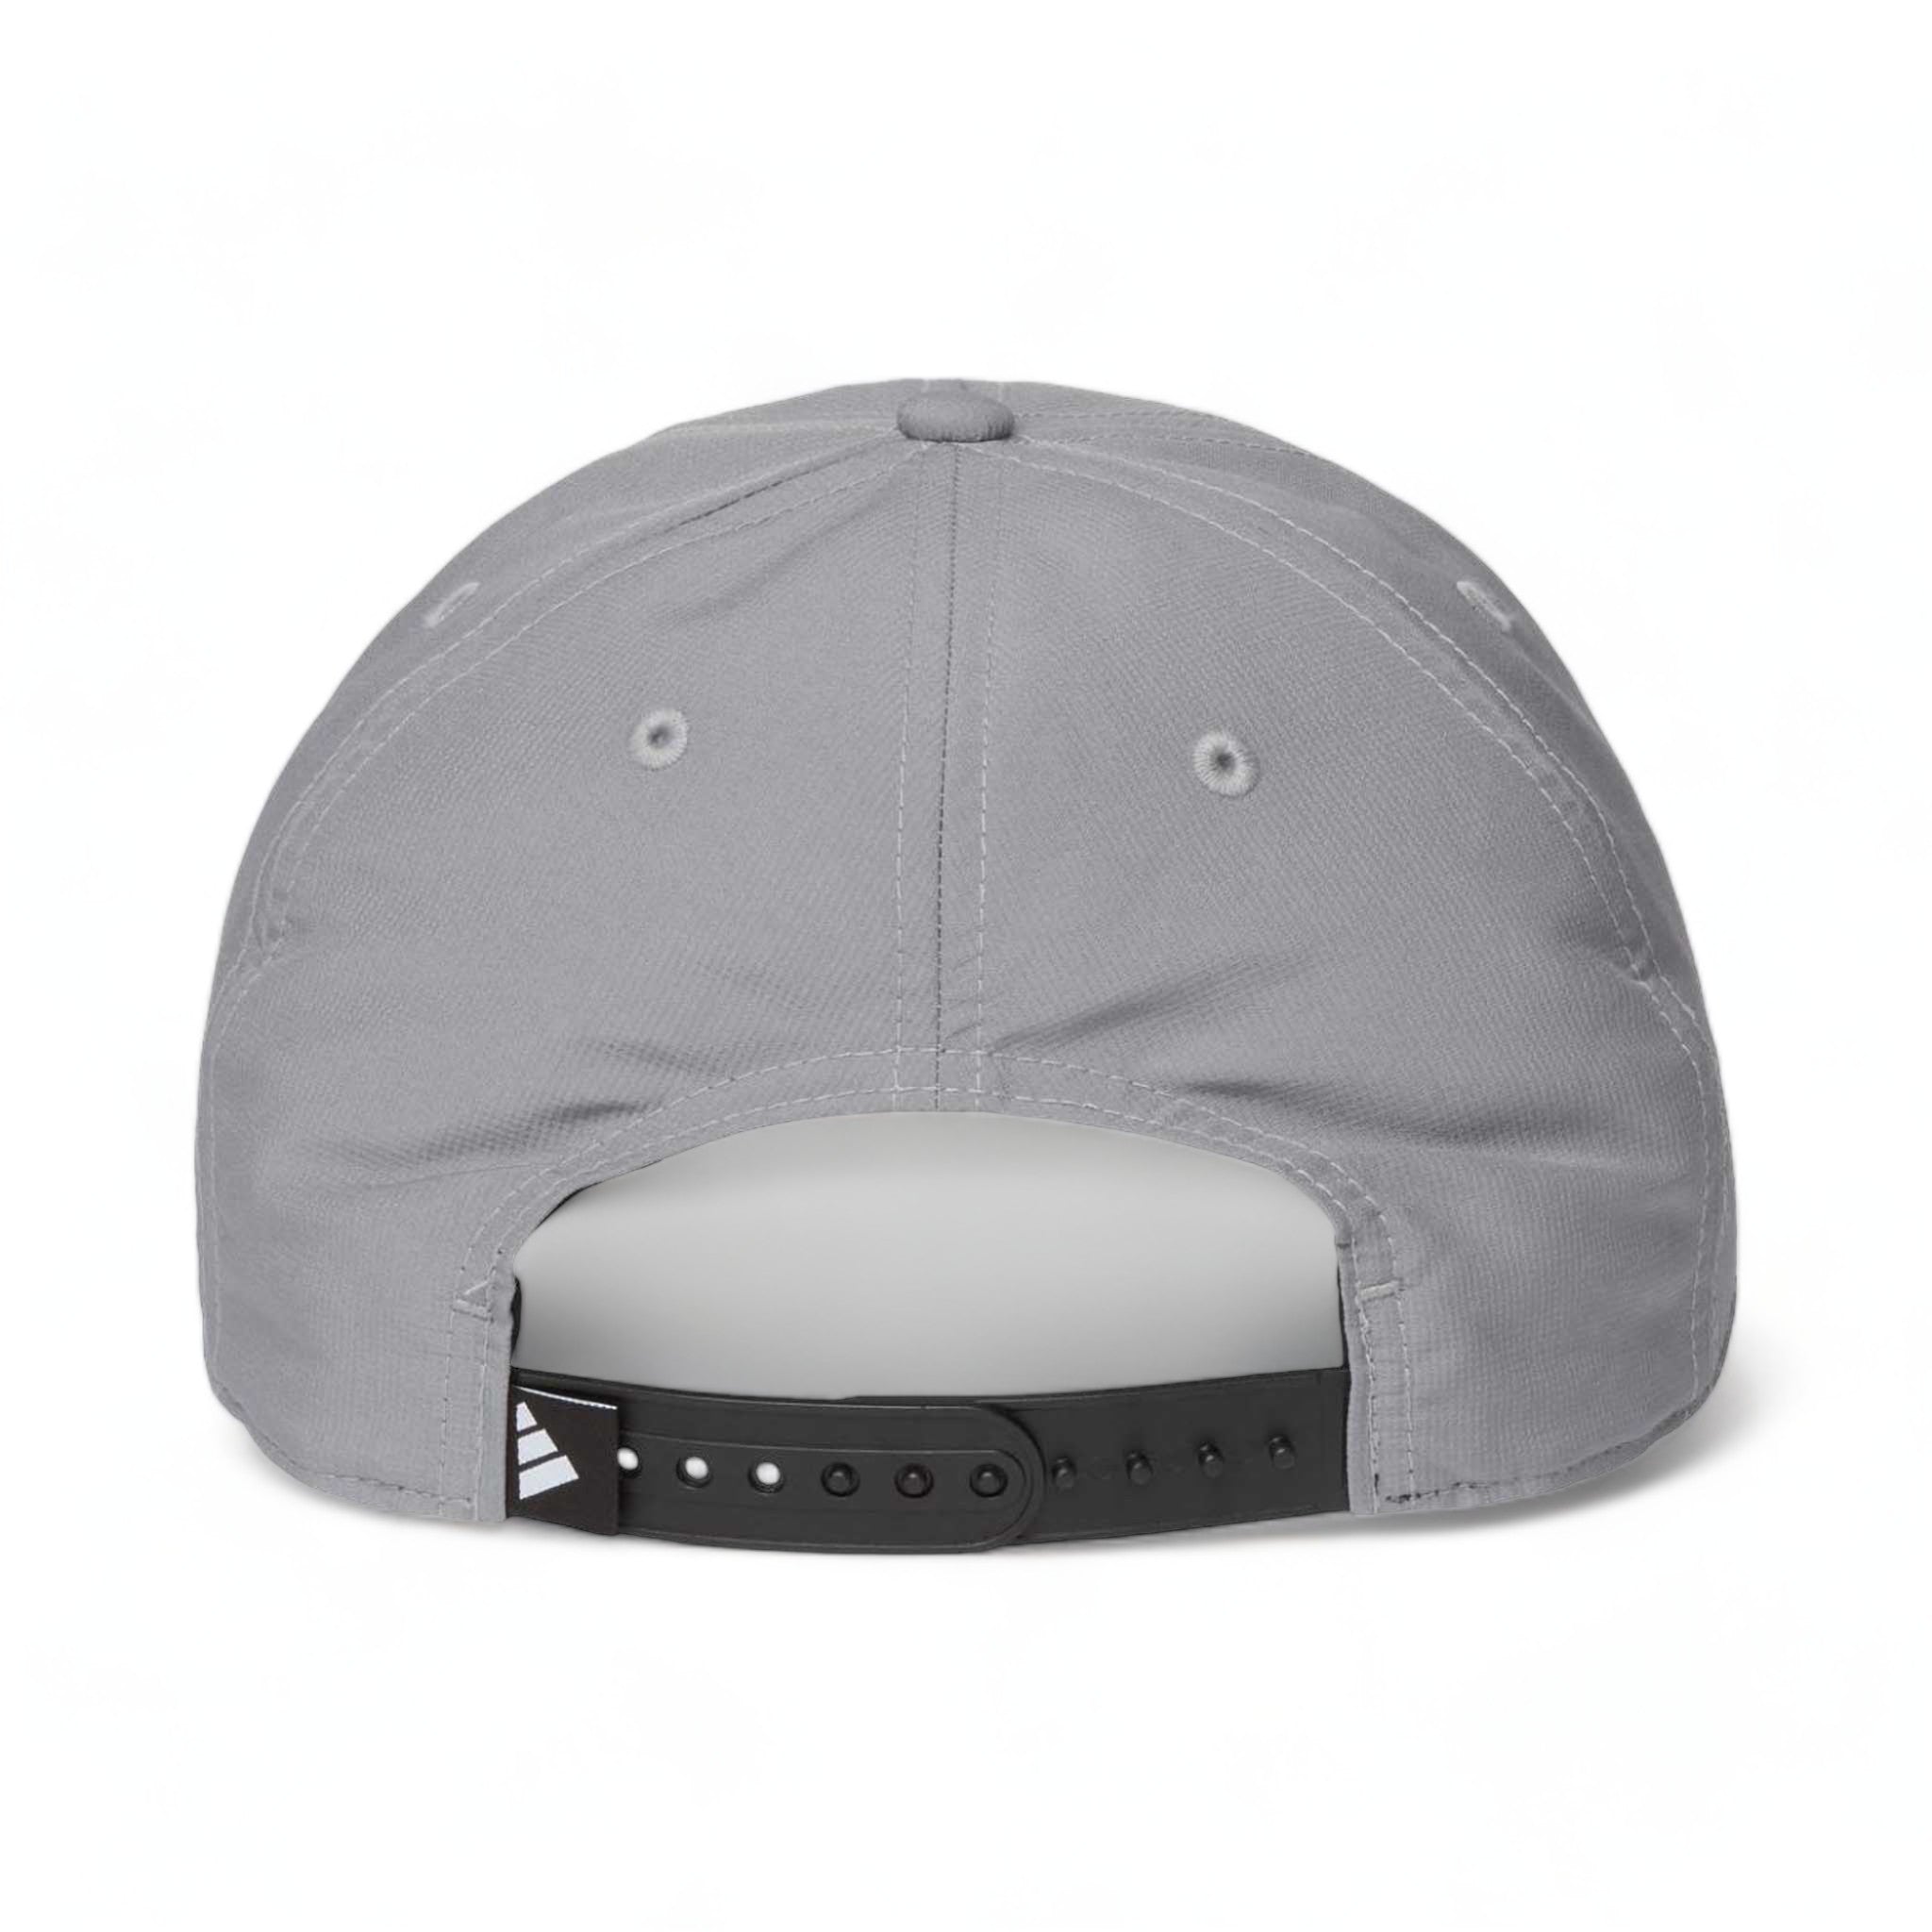 Back view of Adidas A600S custom hat in grey three